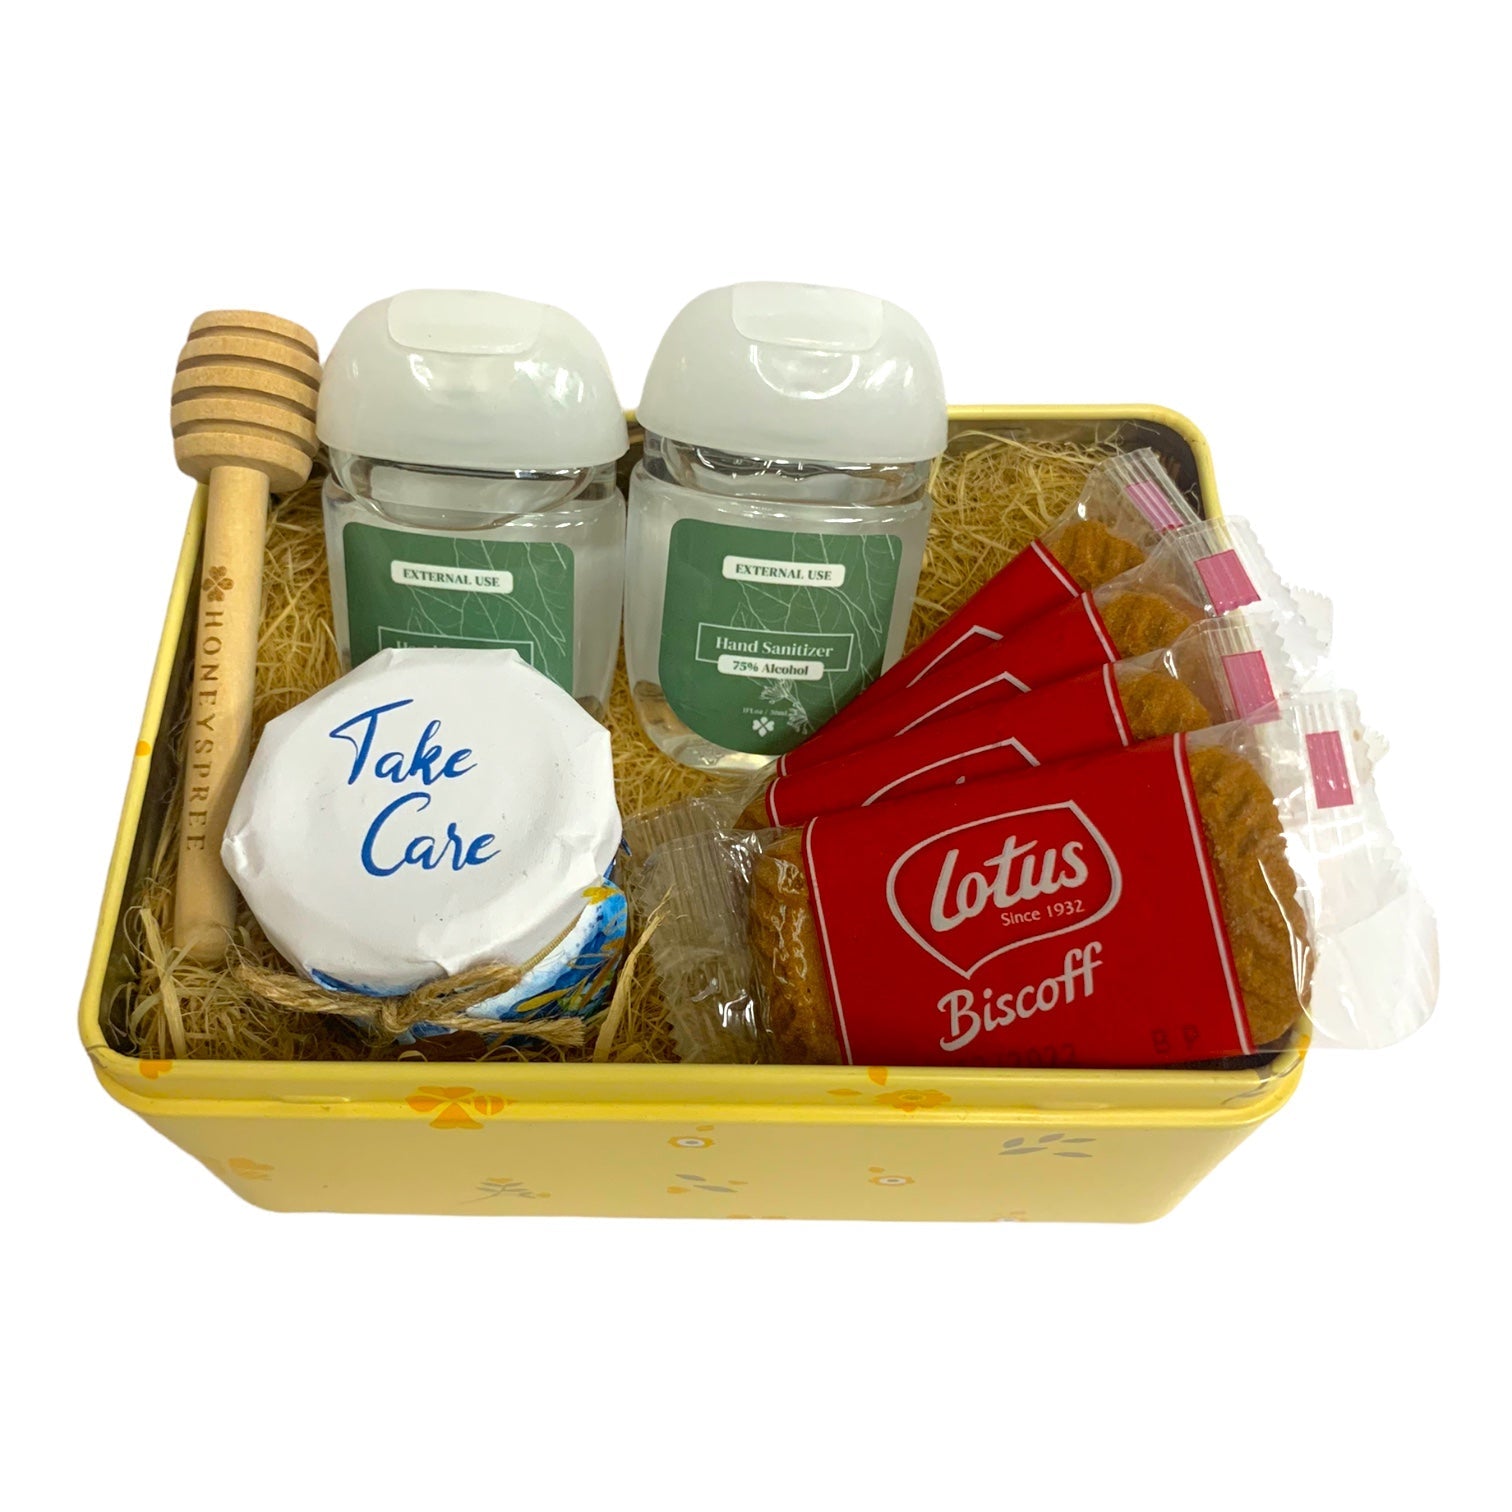 Motivational Honey Gifts - Take Care of Your Loved Ones